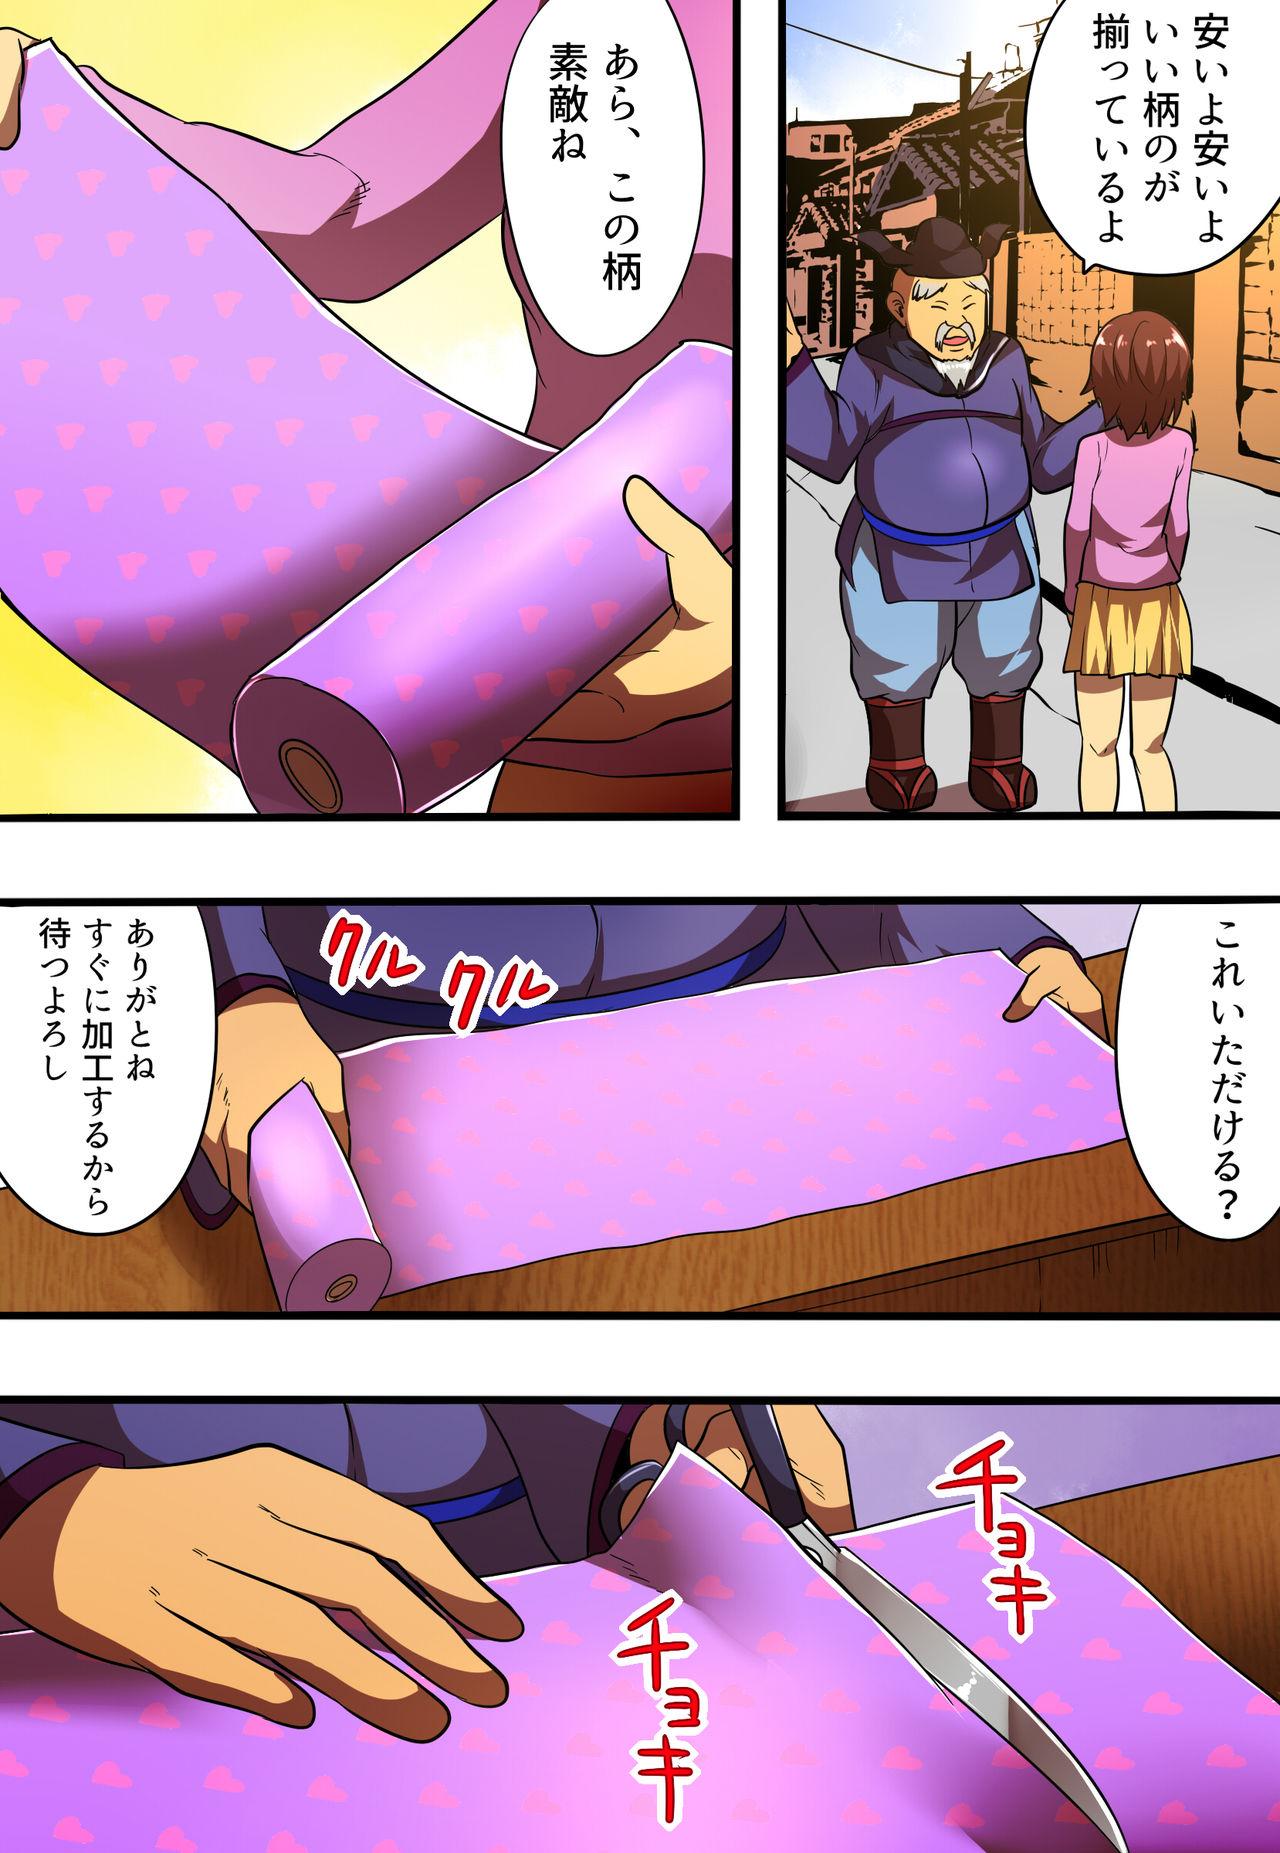 Caught shinenkan Comic of Textile-ification ghost storys Sex Toys - Page 6